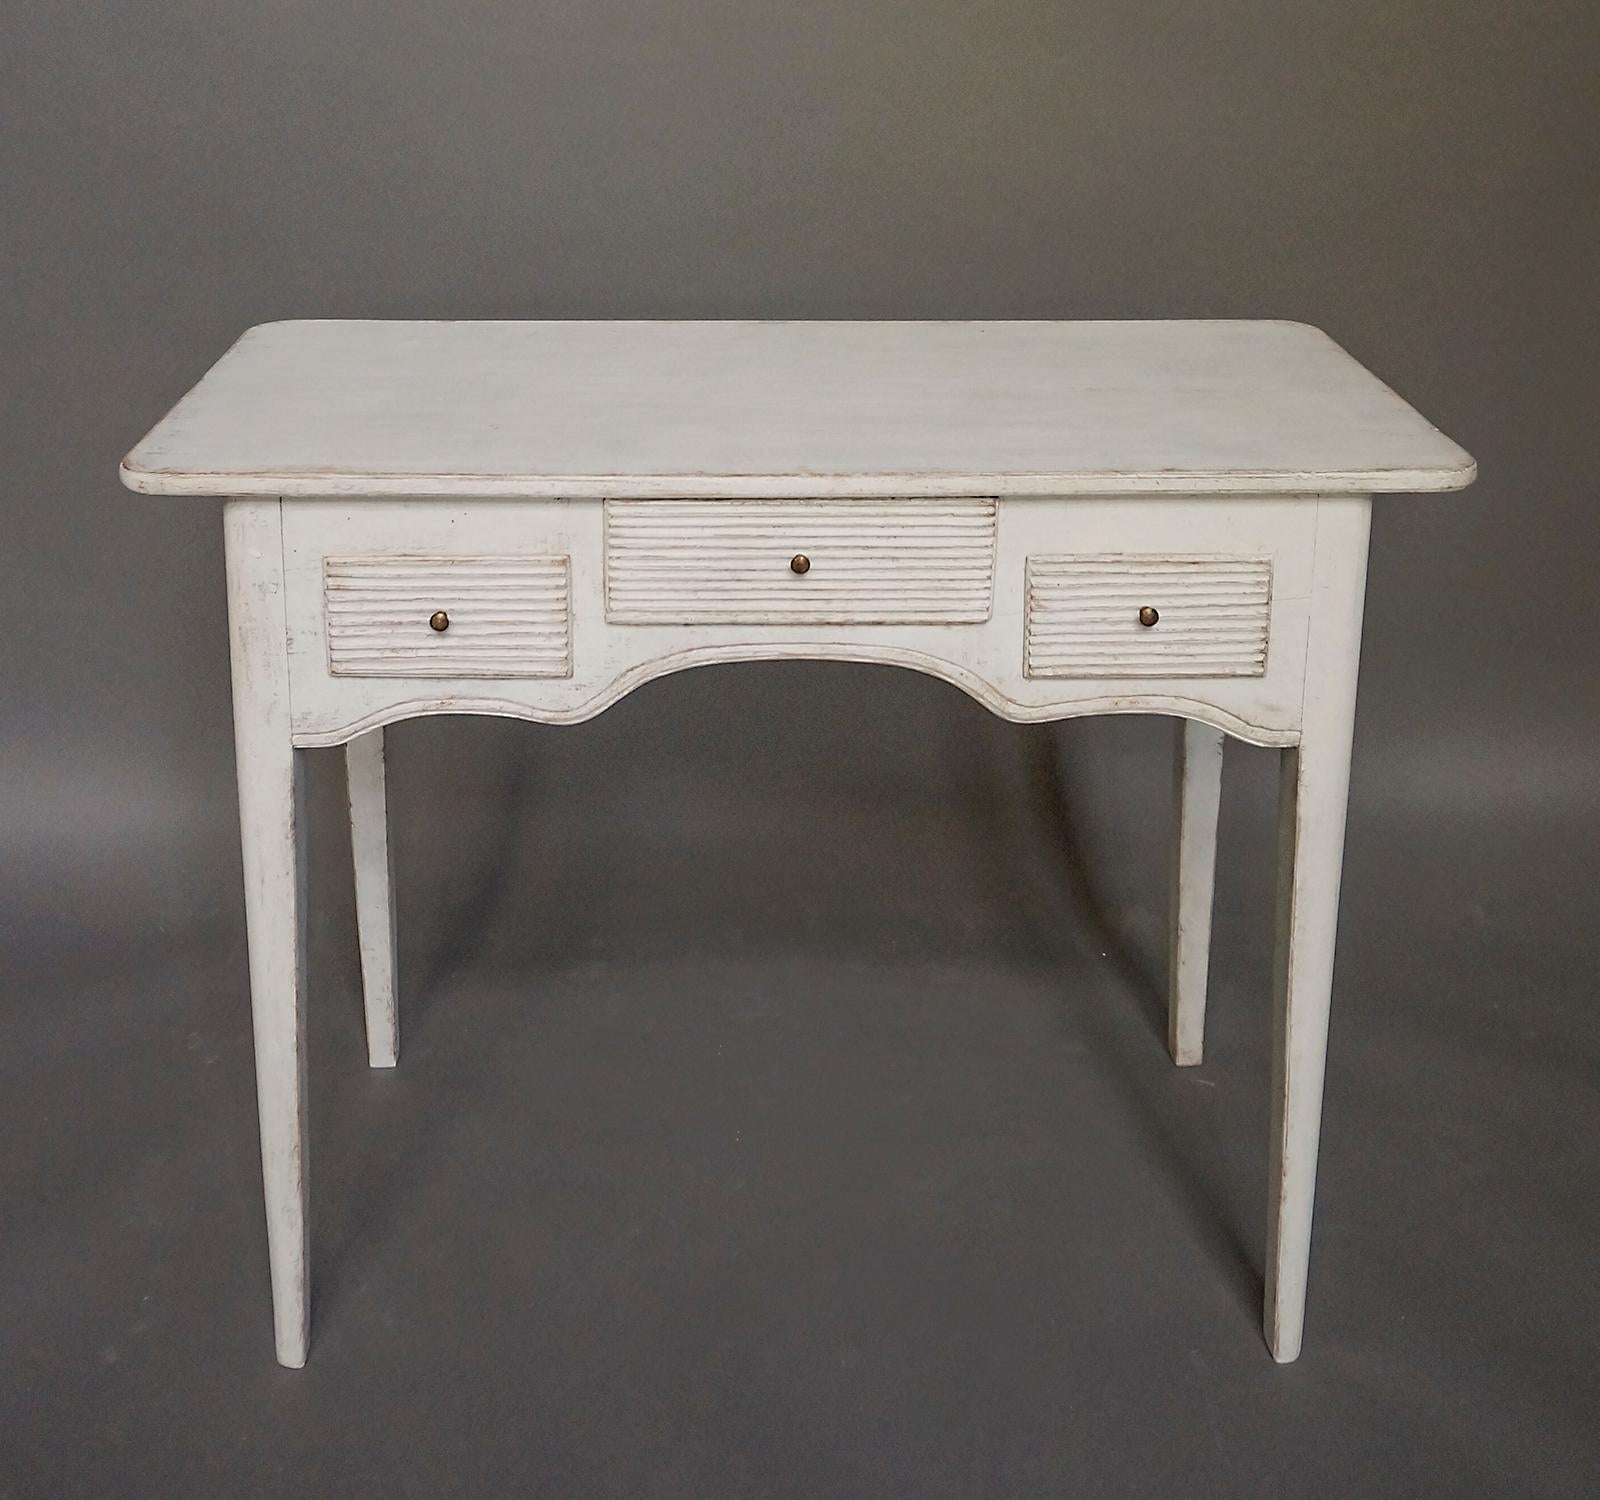 Gustavian writing table, Sweden, circa 1820. Three reeded drawers and a shaped apron with room for the writer’s knees. Tapering legs with rounded corners.